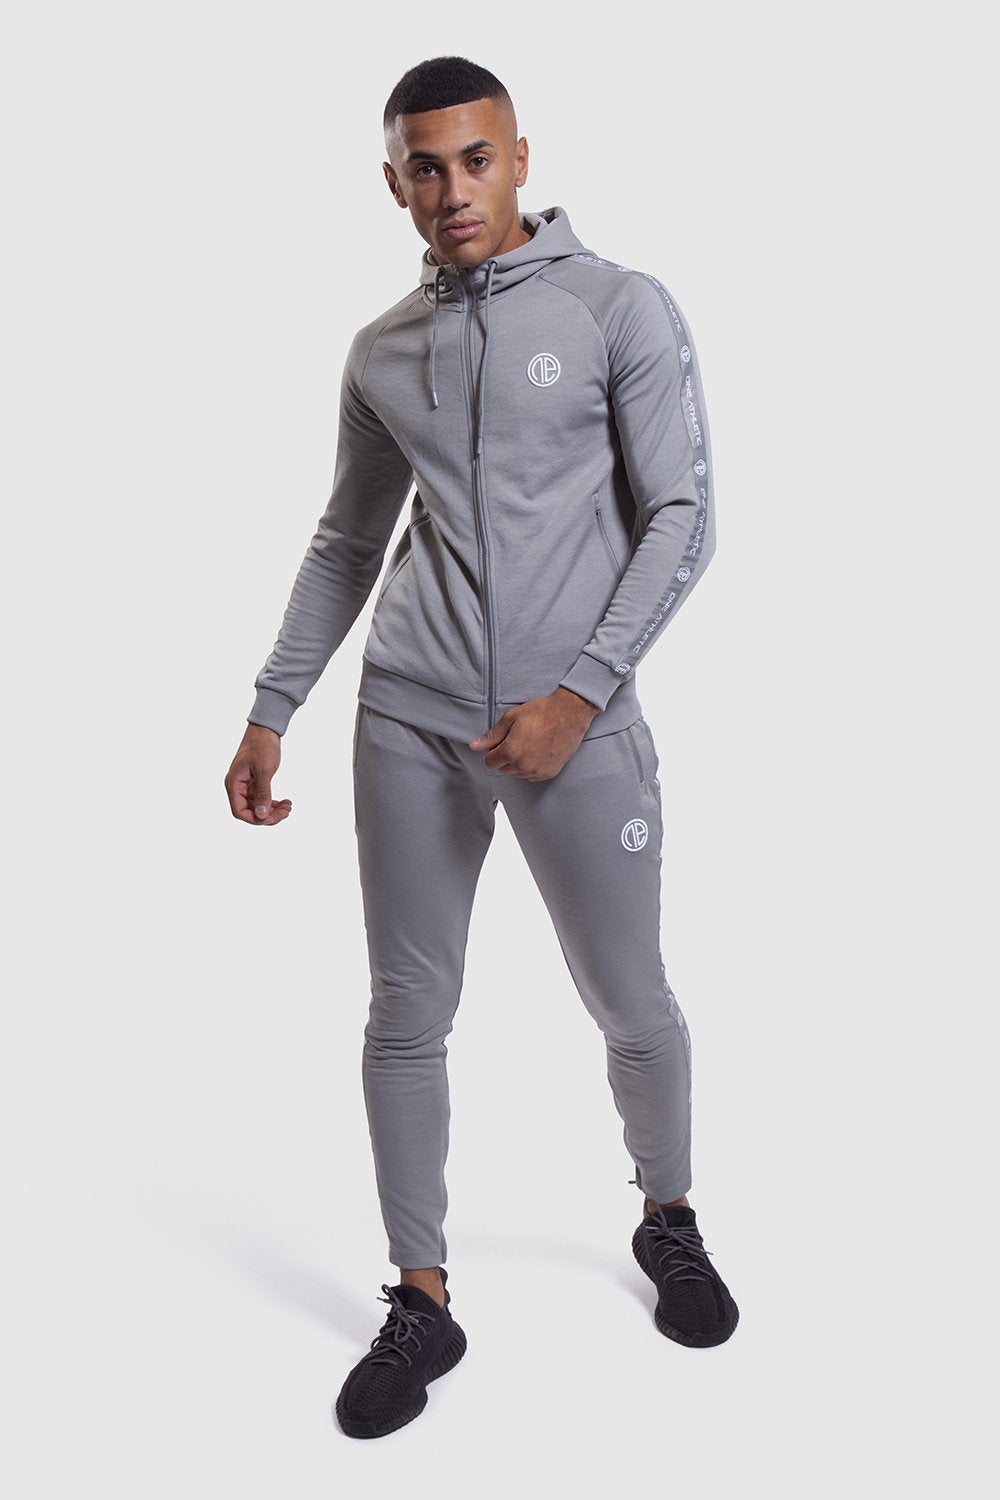 Firestone II tracksuit in grey (mens gym joggers and hoodie)